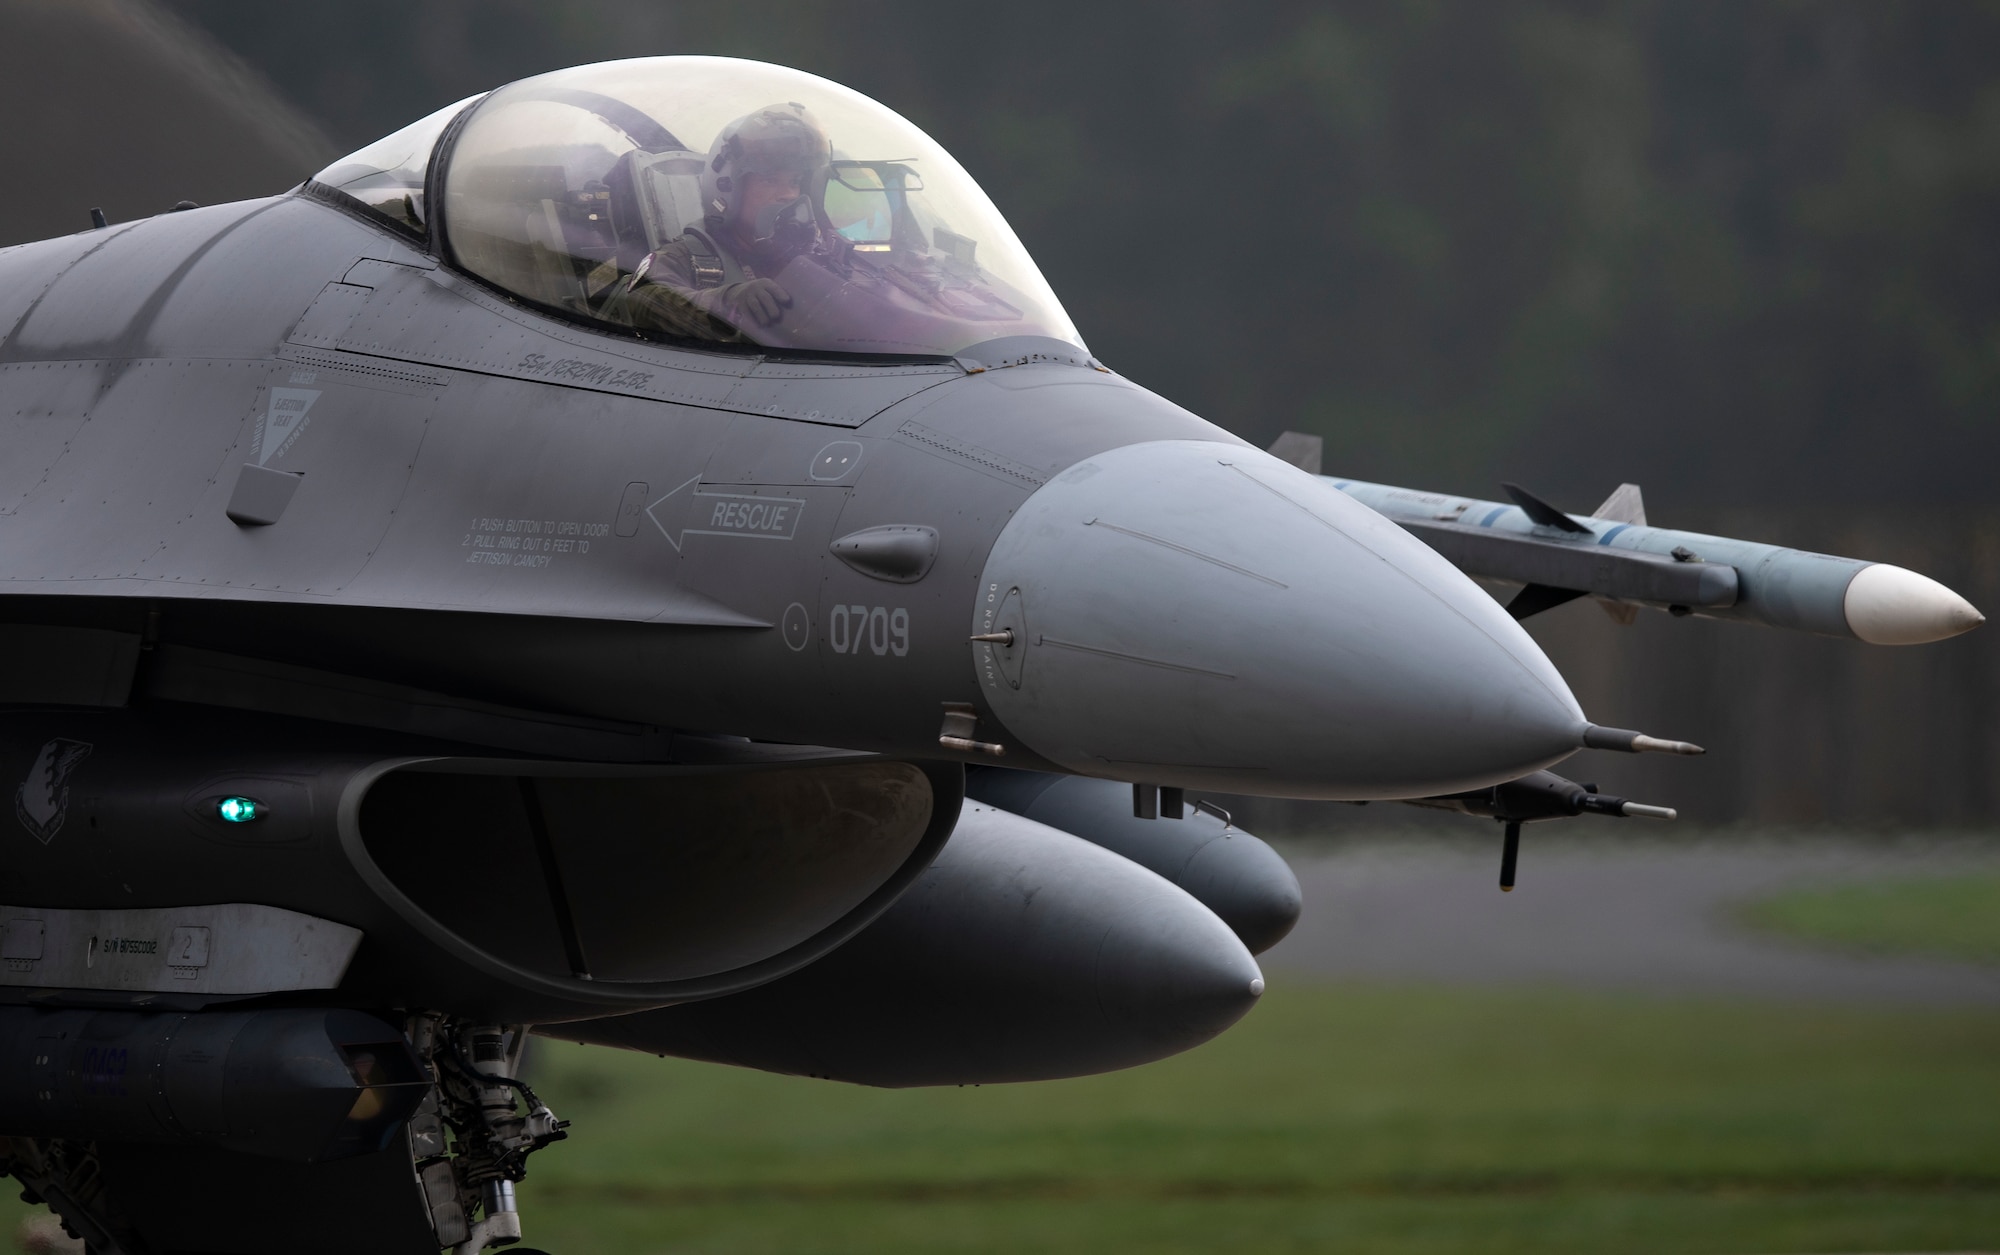 A U.S. Air Force F-16 Fighting Falcon, assigned to the 510th Fighter Squadron, Aviano Air Base, Italy, arrives at Royal Air Force Lakenheath, England, Aug. 28, 2020. Aircraft and Airmen from the 510th FS are participating in a flying training deployment event to enhance interoperability, maintain joint readiness and strengthen relationships with regional allies and partners. (U.S. Air Force photo by Airman 1st Class Jessi Monte)